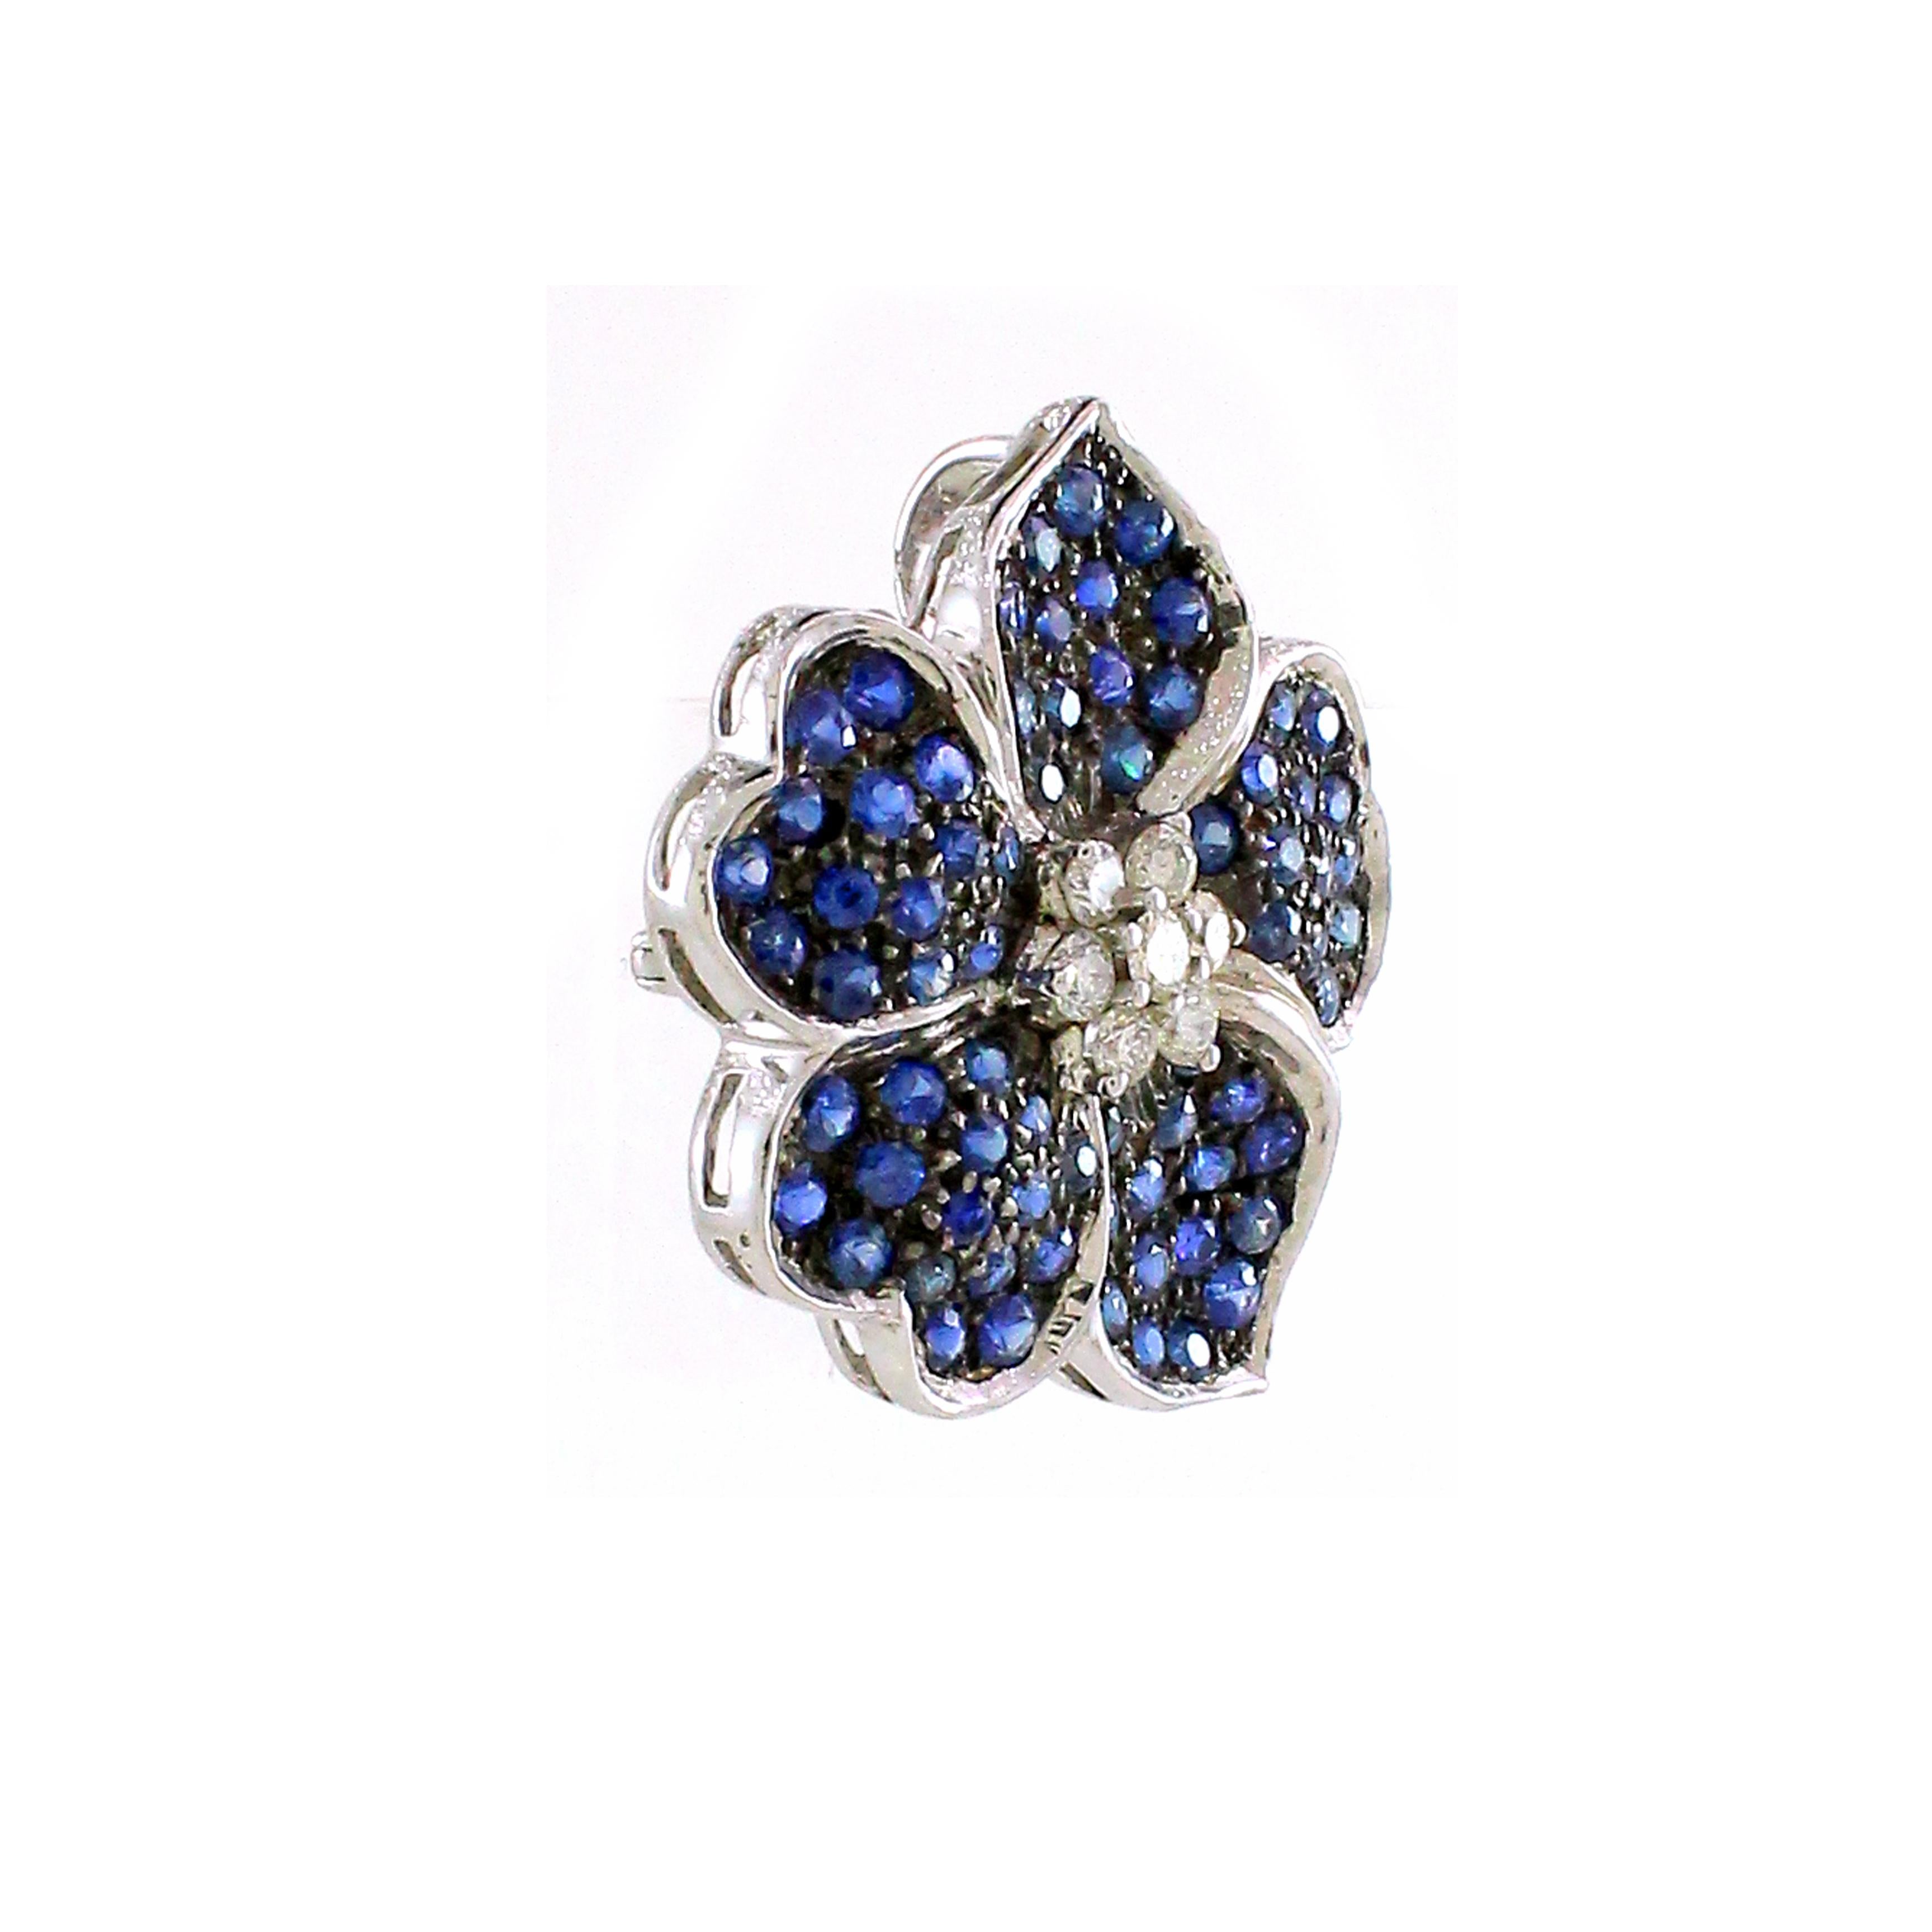 Step into a world of timeless elegance with our exquisite brooch, meticulously crafted from radiant 18k white gold, boasting a weight of 11.36 grams. Created from 2.91 carats of ethereal Ceylon blue sapphires, each meticulously cut to capture their